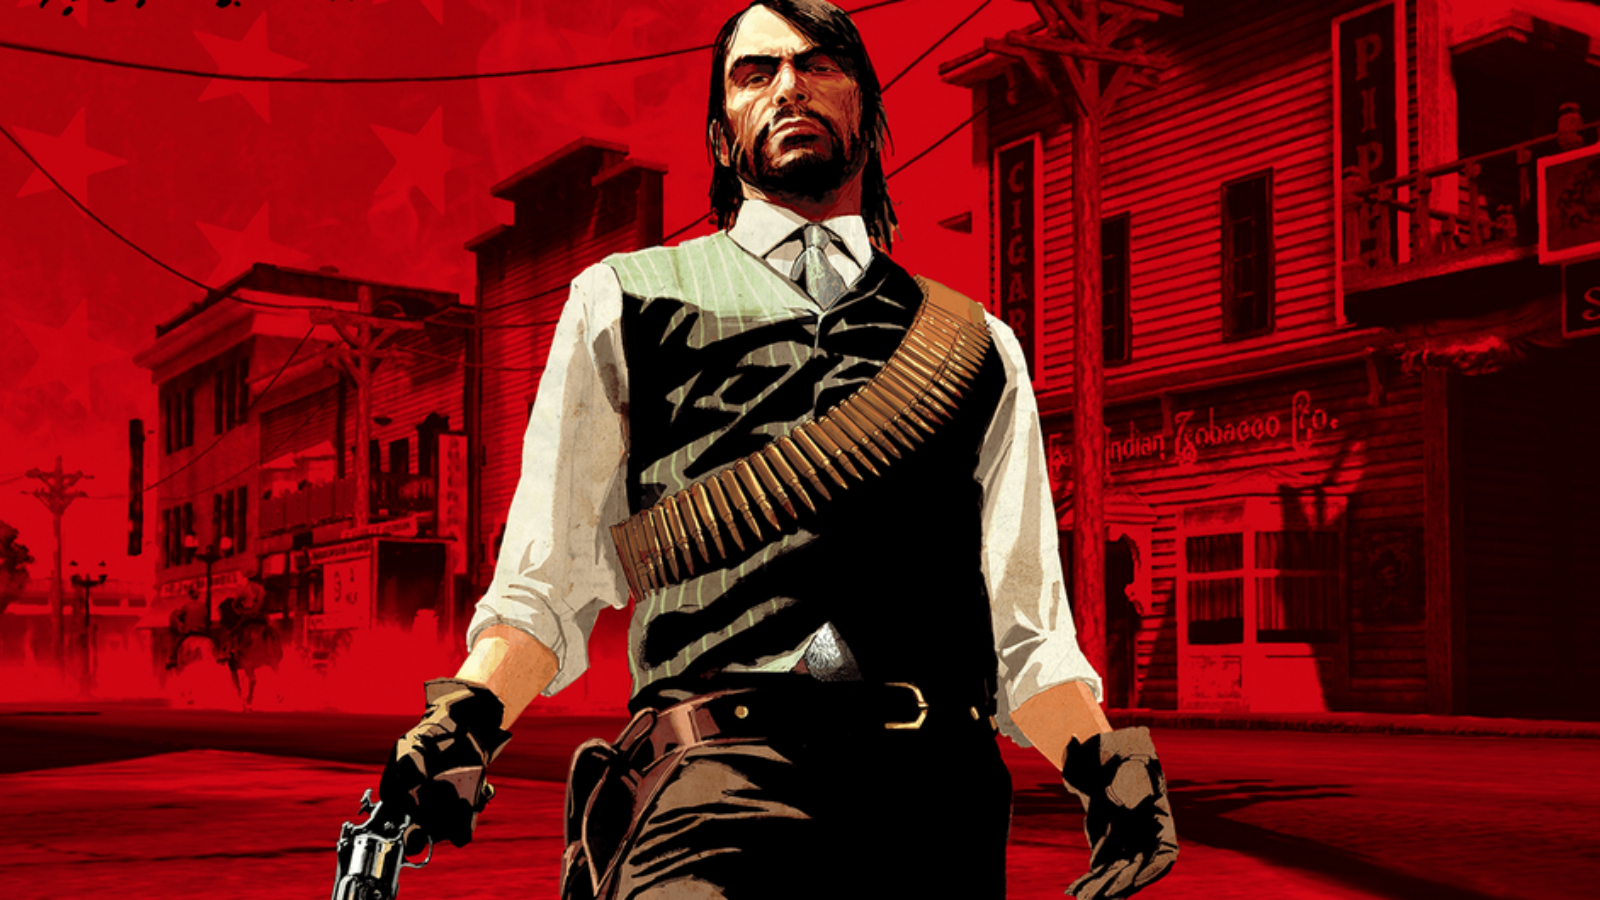 Red Dead Redemption Remastered edition to follow the GTA Trilogy reveal